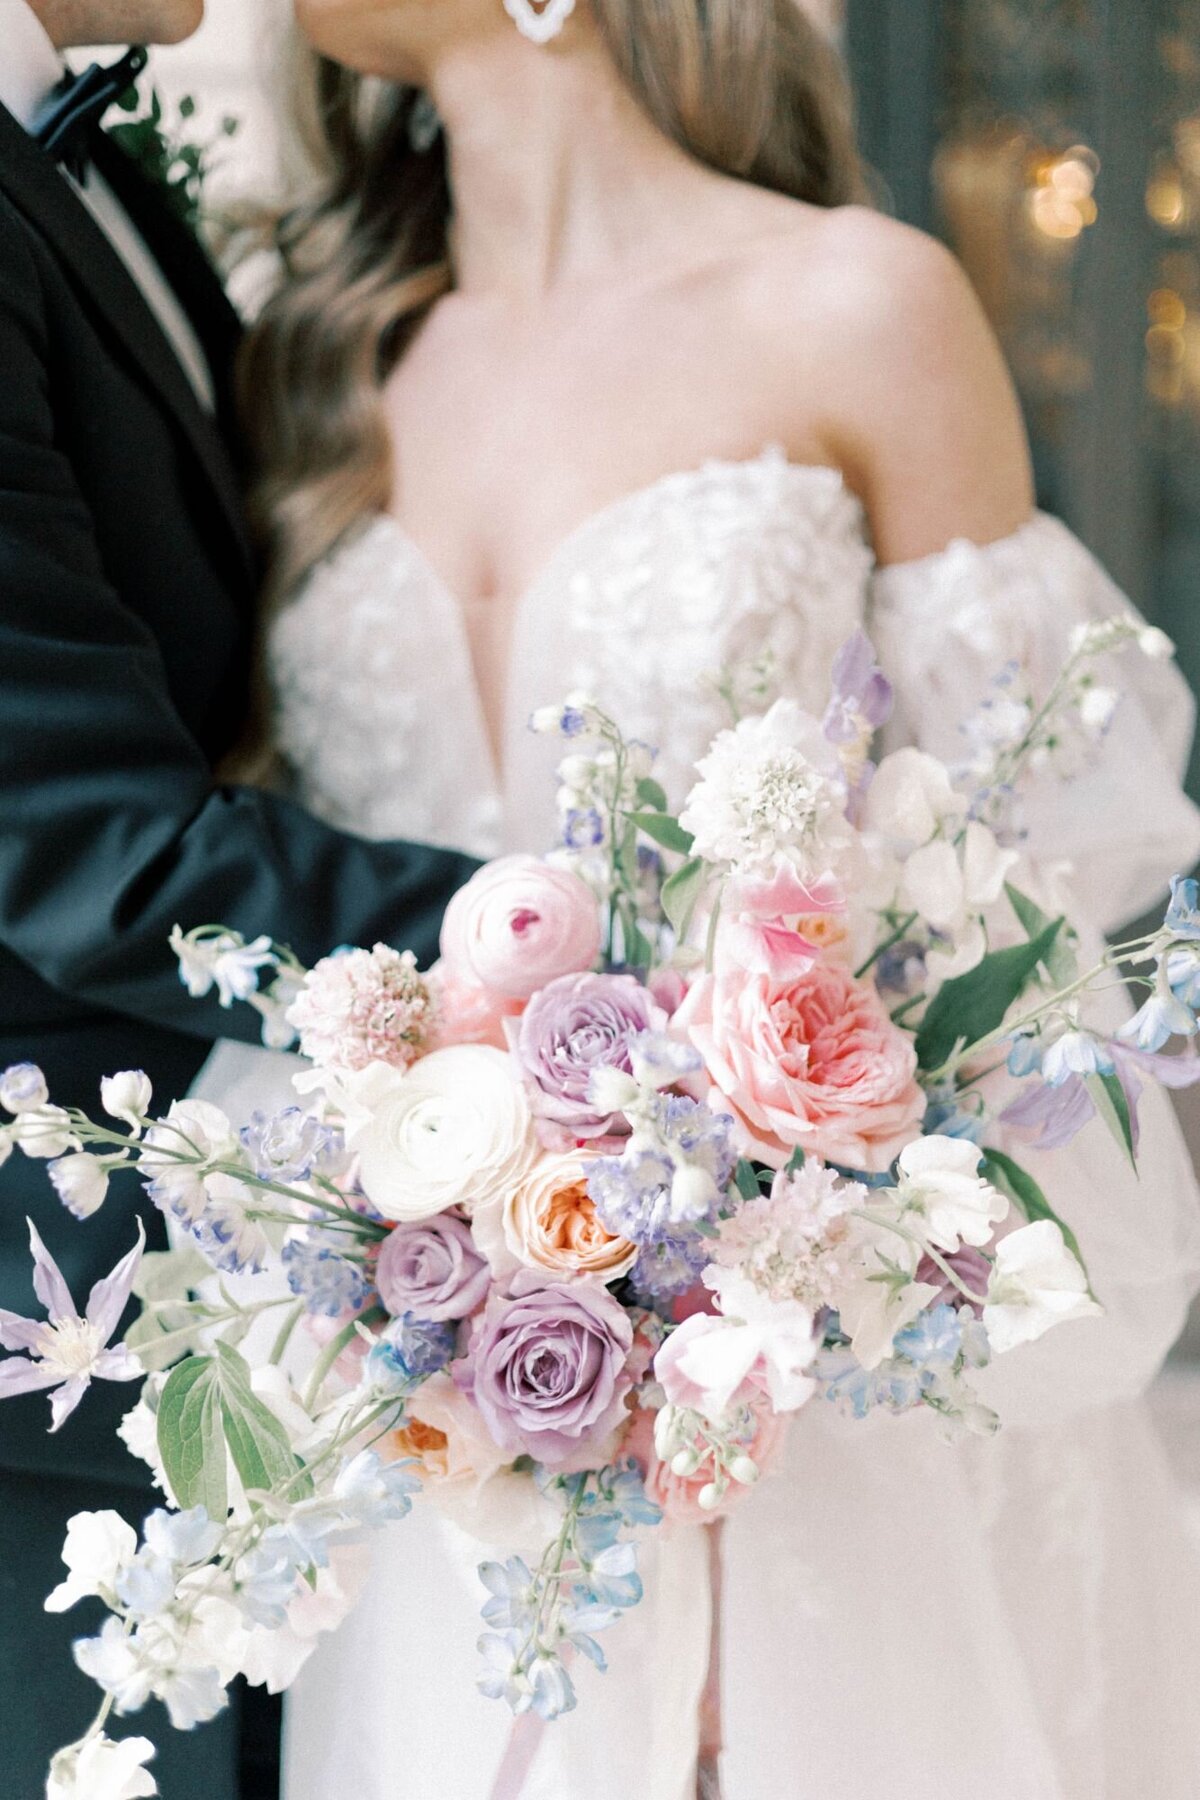 Close up shot of bride holding bouquet of flowers while she and the groom embrace each other.